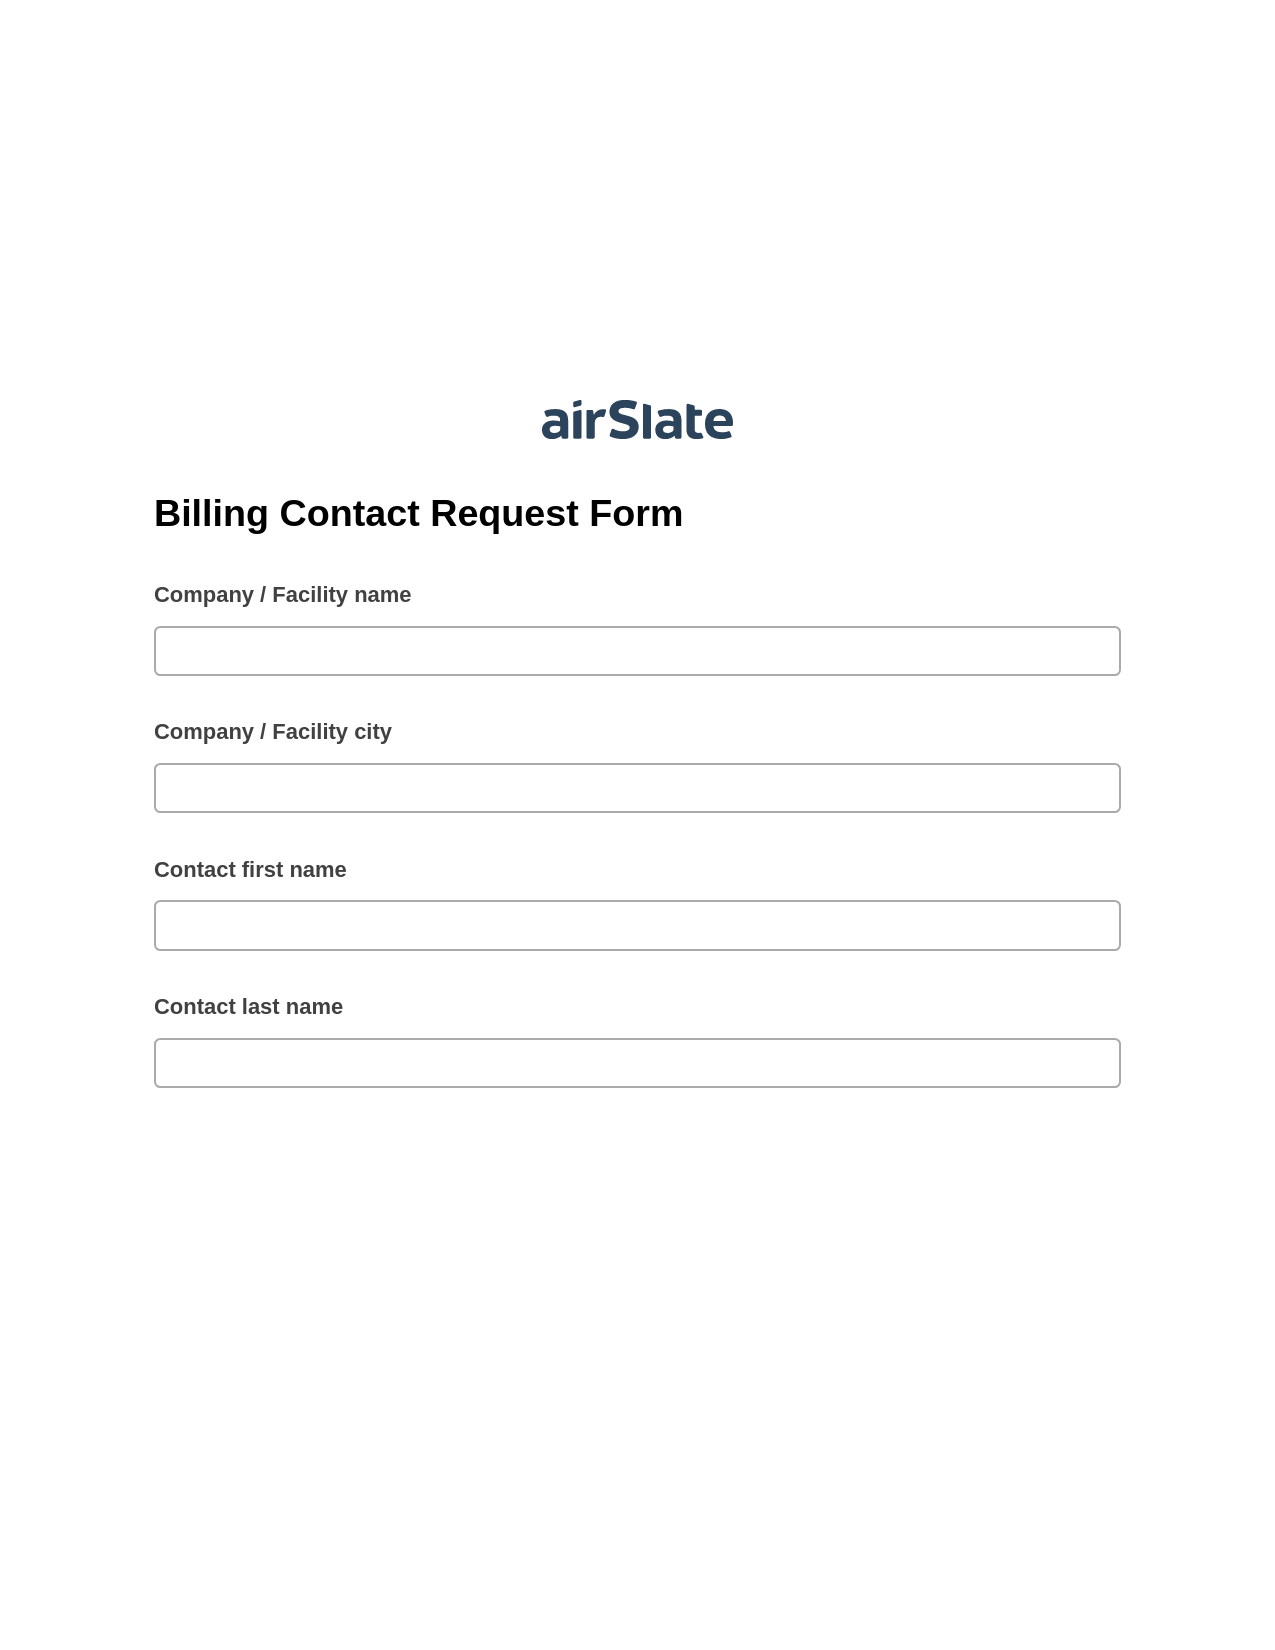 Multirole Billing Contact Request Form Pre-fill Dropdown from Airtable, Update MS Dynamics 365 Records Bot, Box Bot